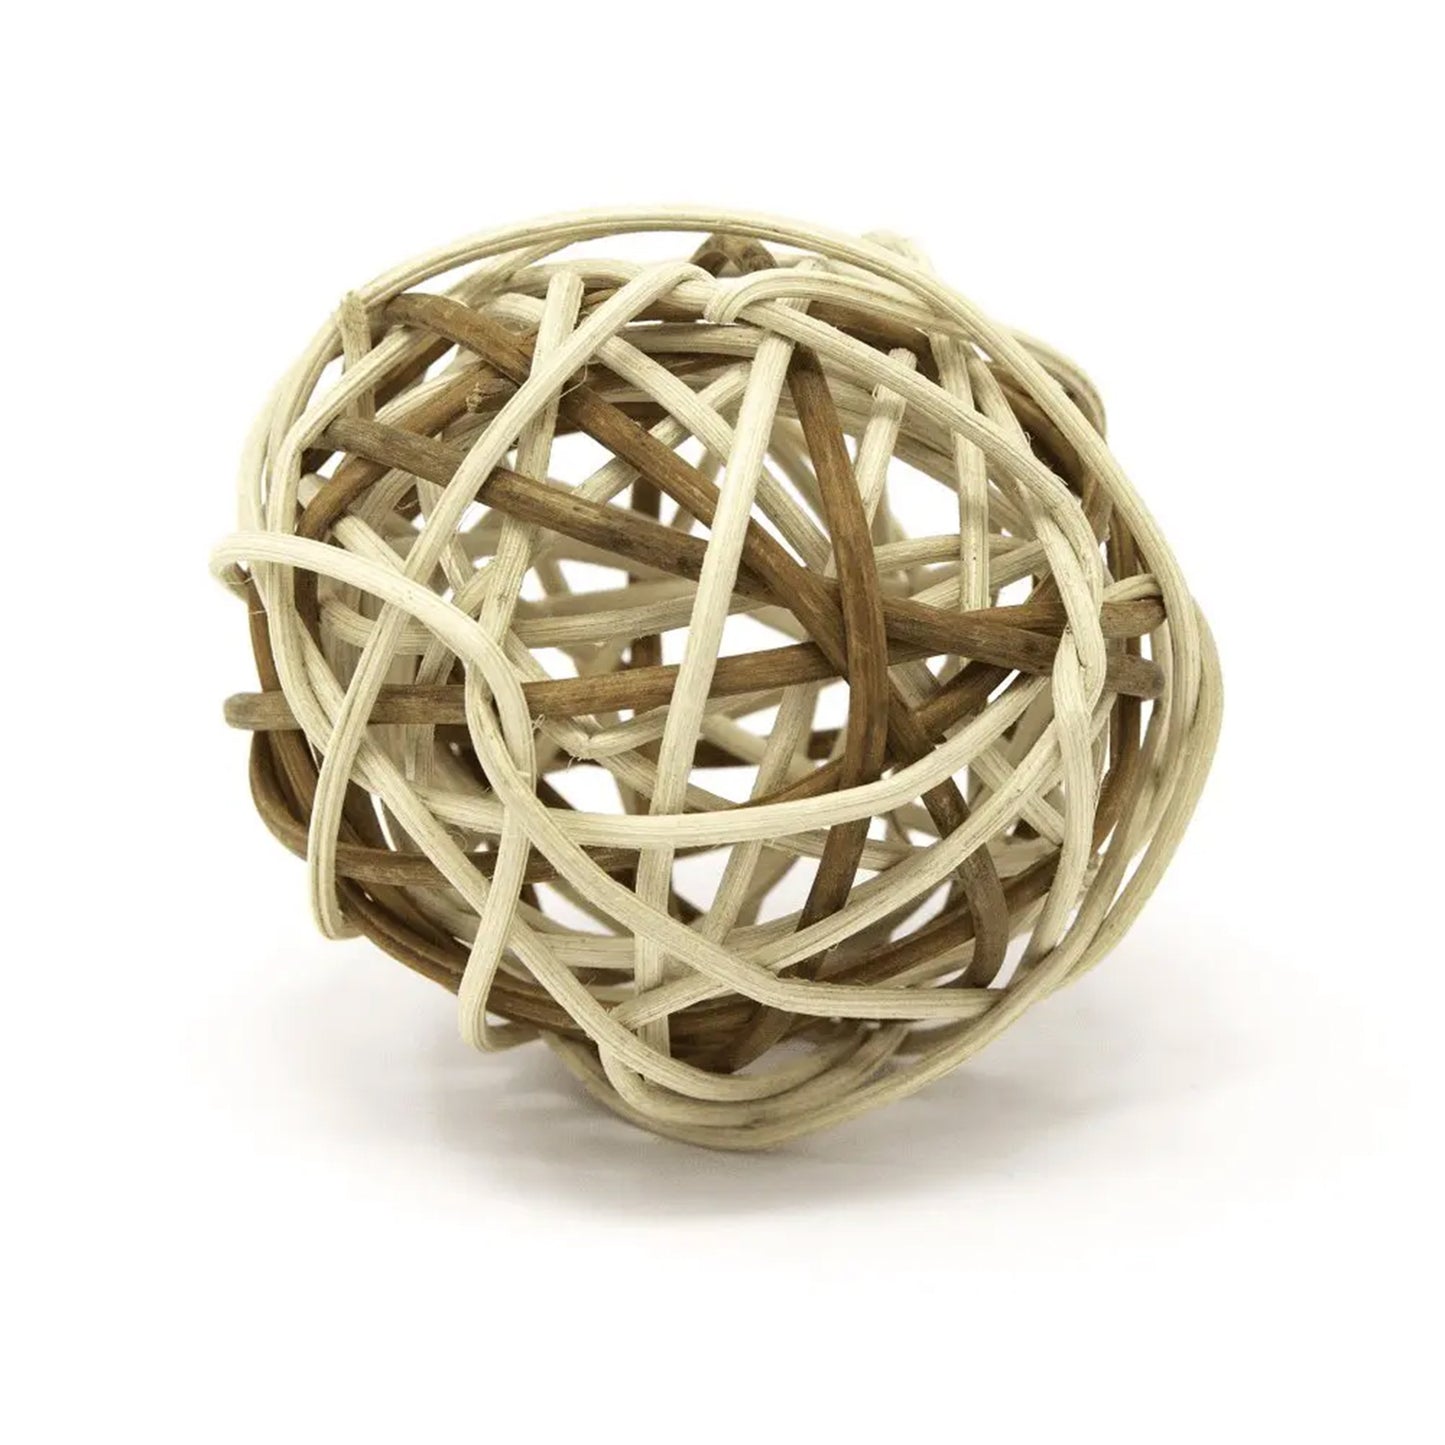 Oxbow Animal Health Enriched Life Rattan Ball Small Animal Toy, One Size, Oxbow